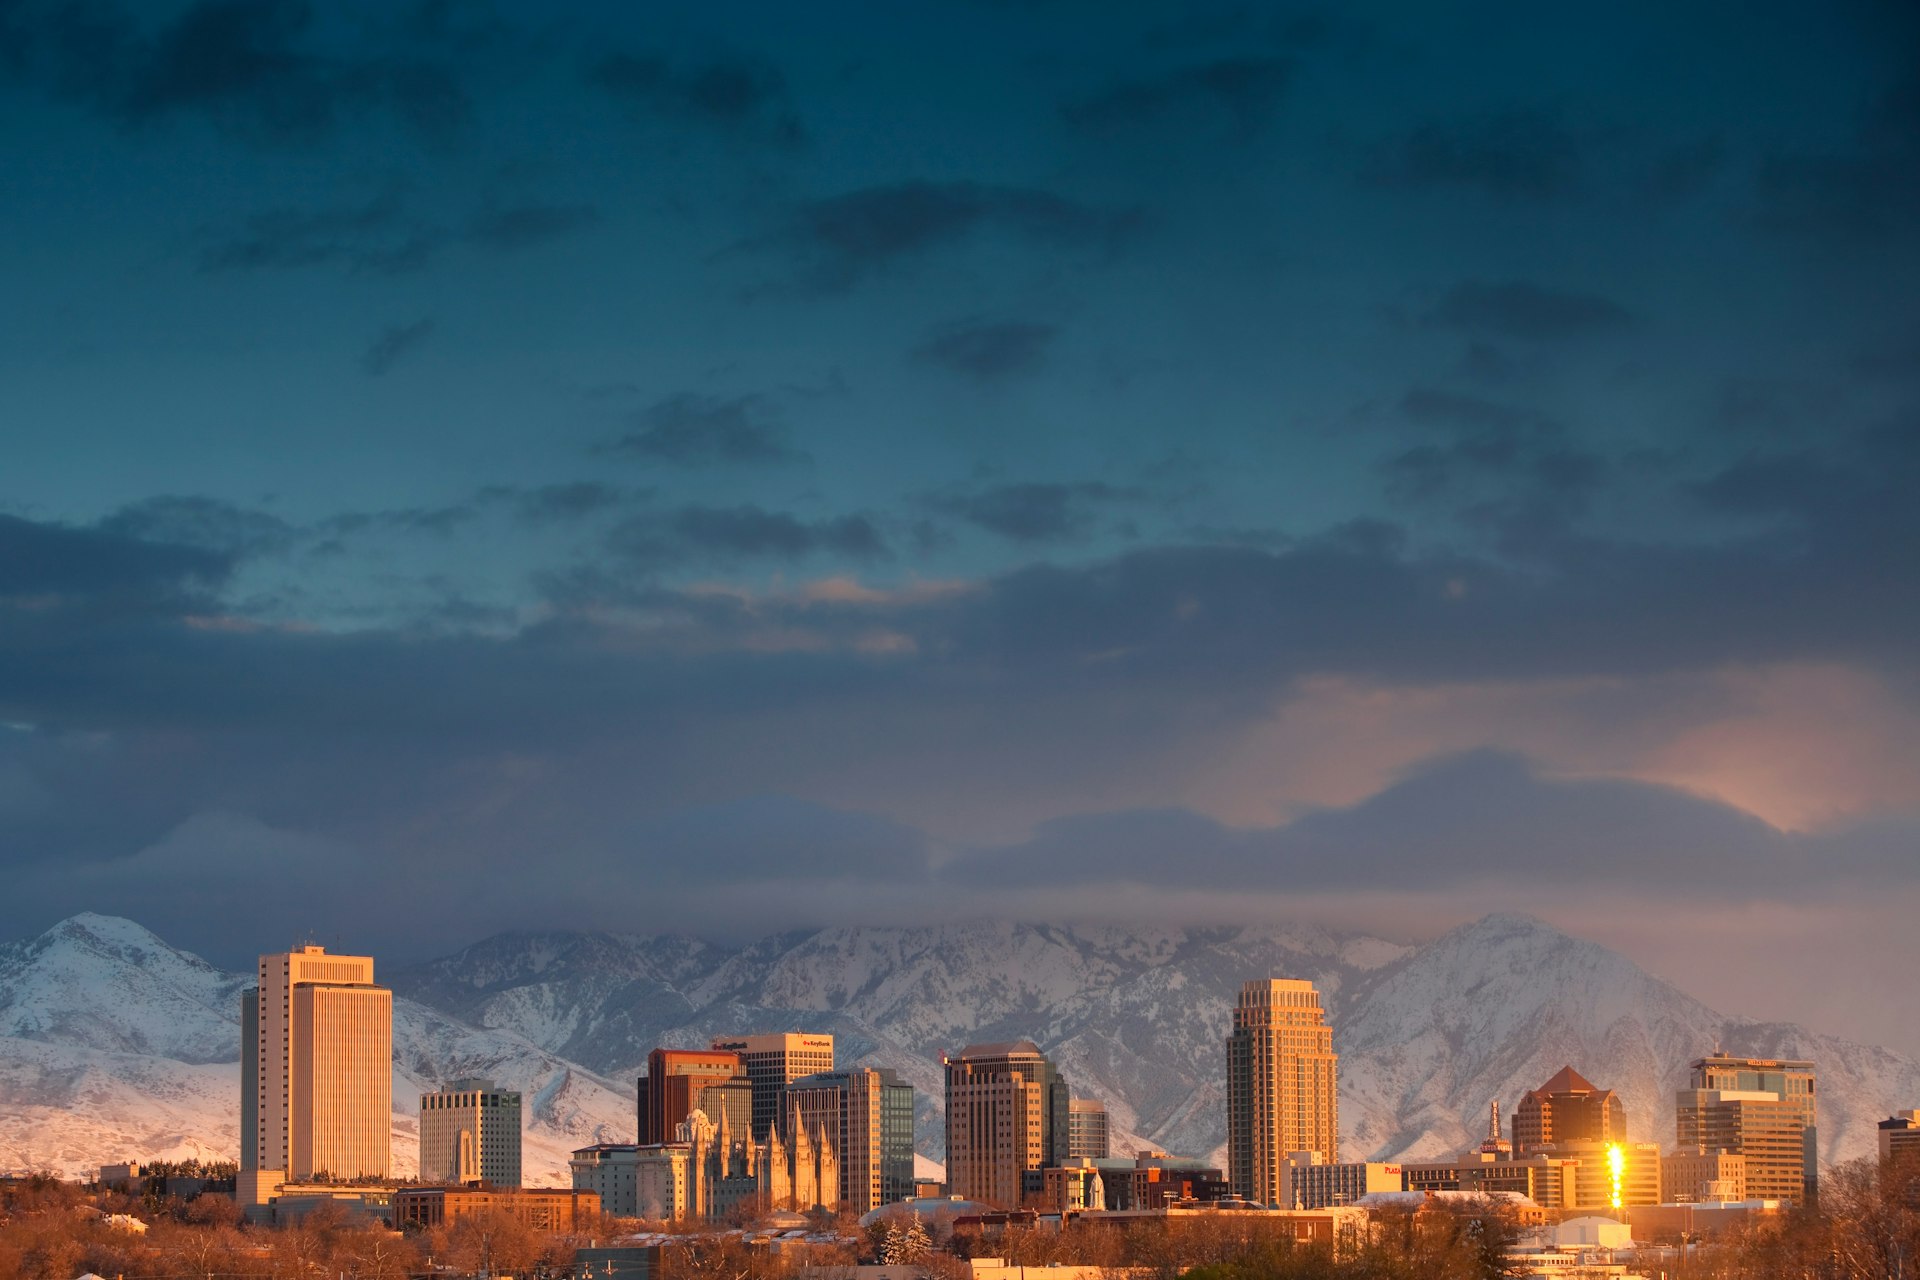 Salt Lake City’s proximity to the Wasatch and Oquirrh mountain ranges makes it a perfect winter destination, but there’s plenty to do downtown too. Image by Joel Addams / Aurora / Getty